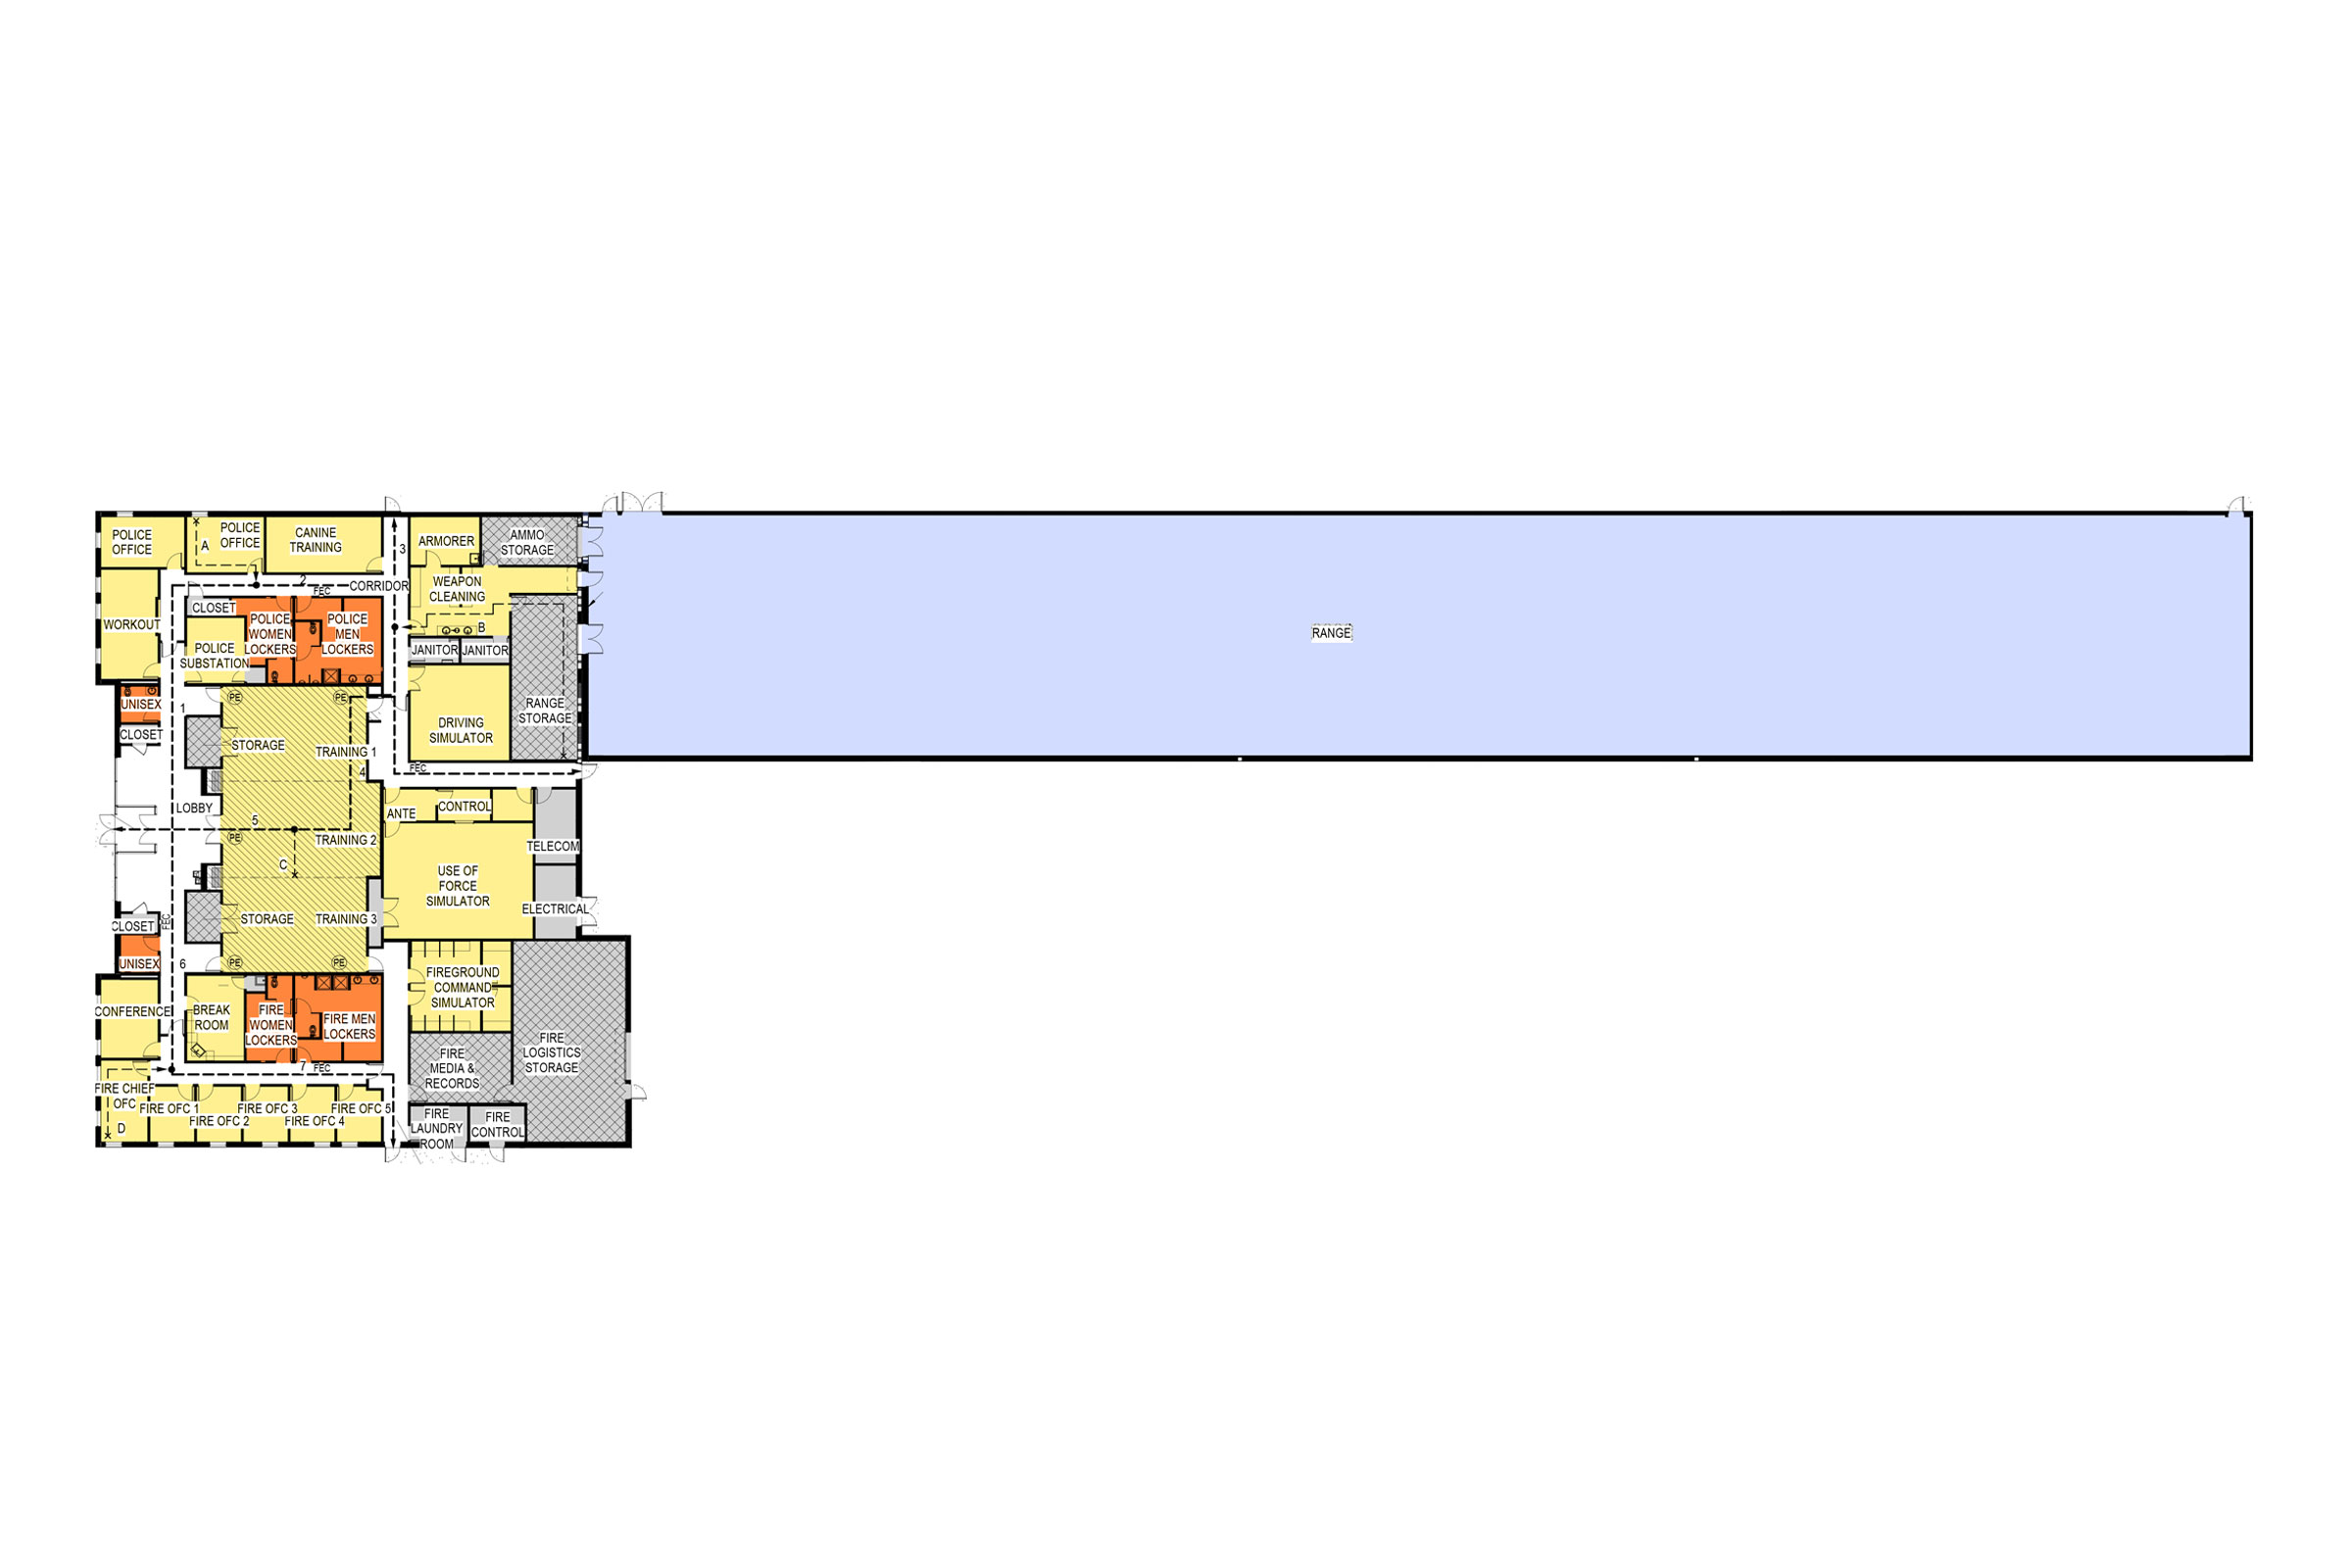 Haynes Lacewell Police and Fire Training Facility Floorplan